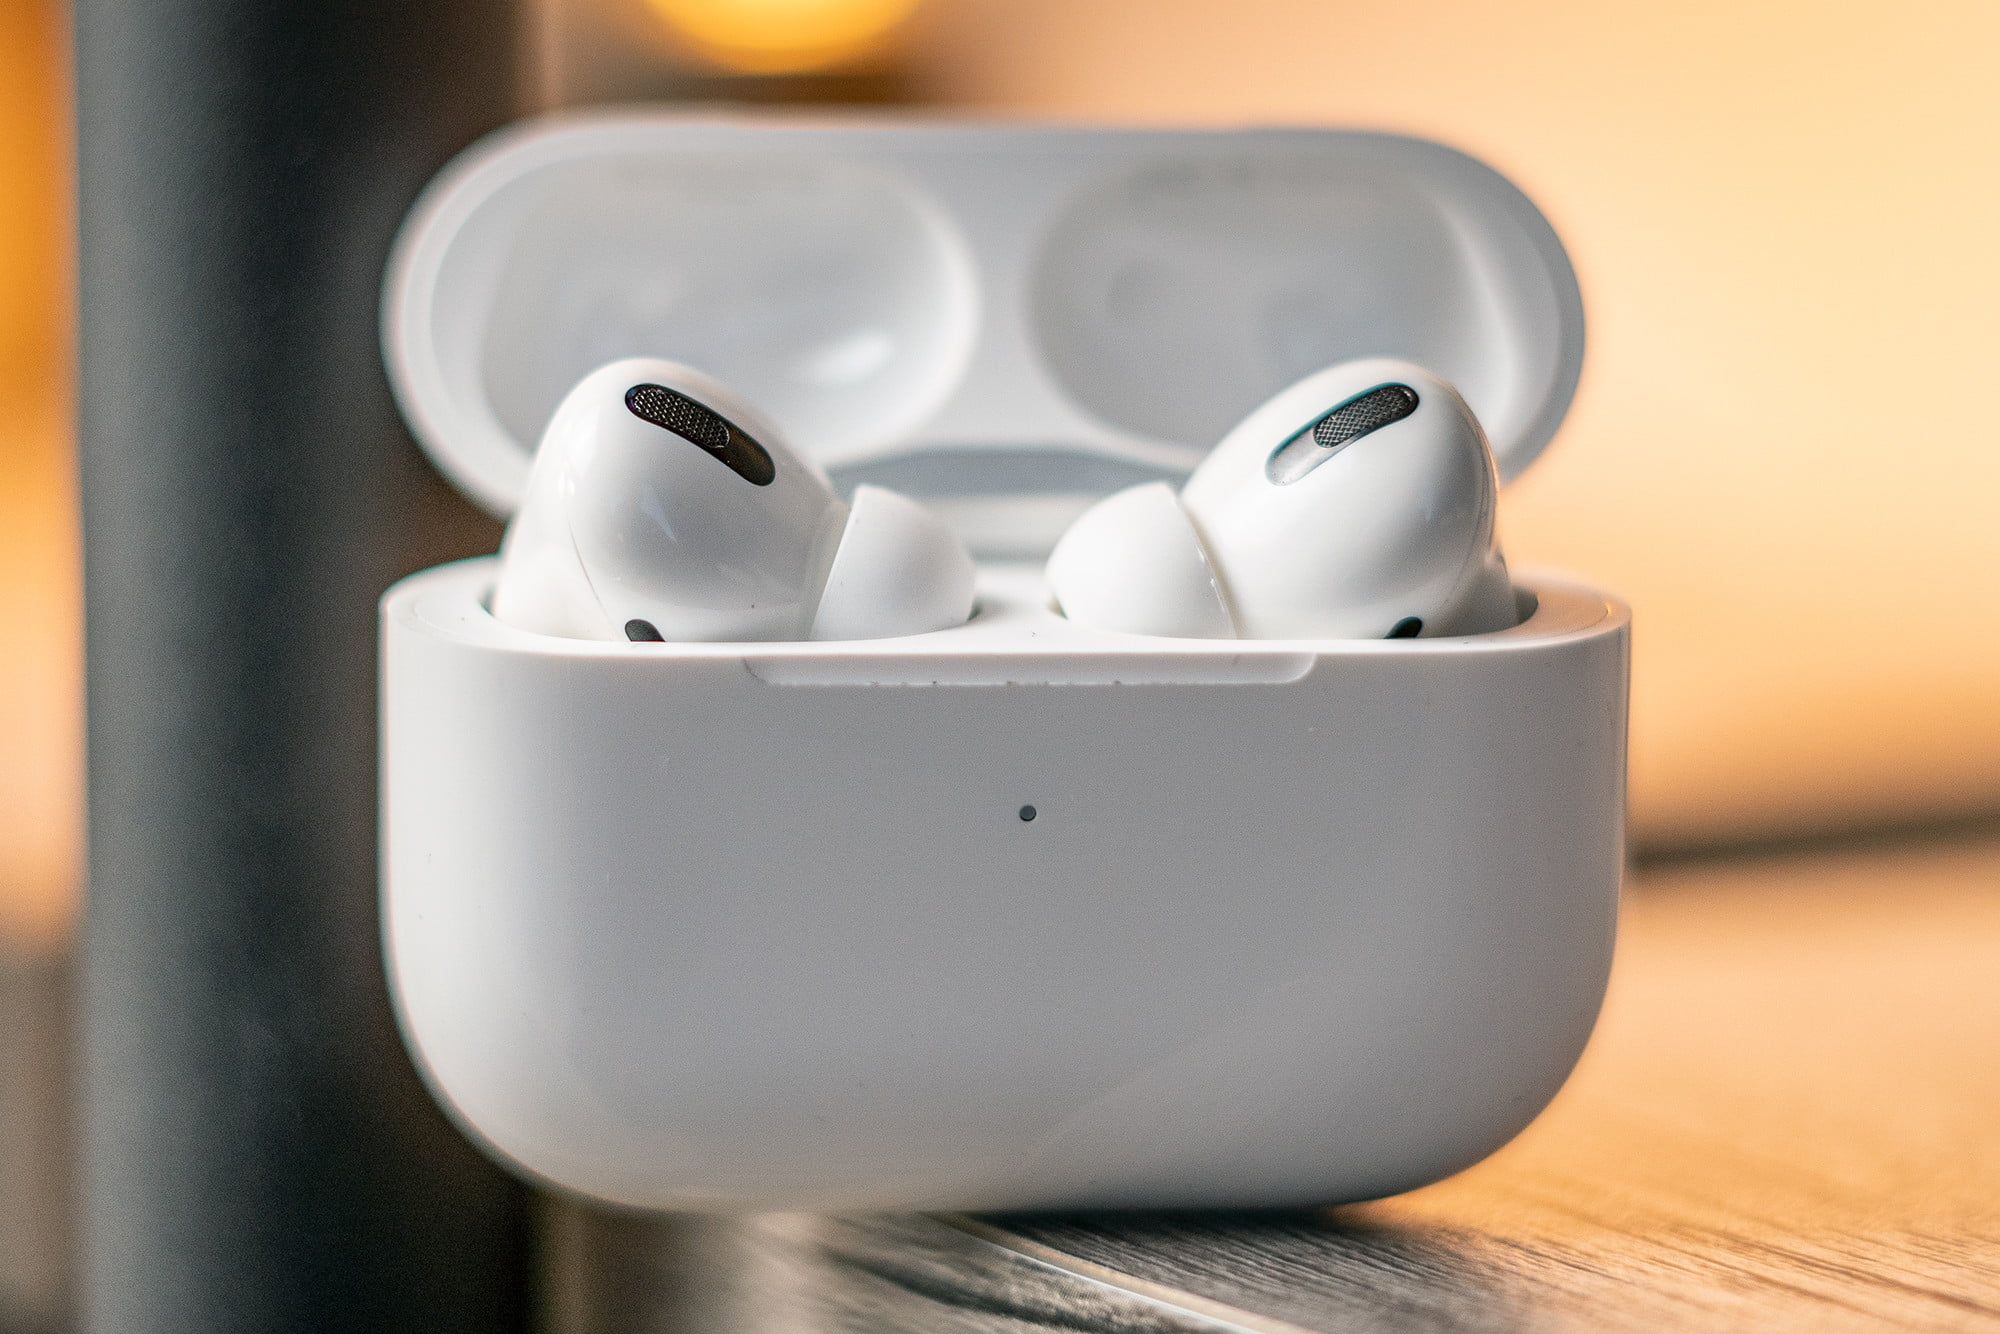 Airpods pro ios. Наушники AIRPODS Pro 2. Apple AIRPODS Pro 3. Наушники Эппл аирподс про. Apple AIRPODS 3rd Generation.